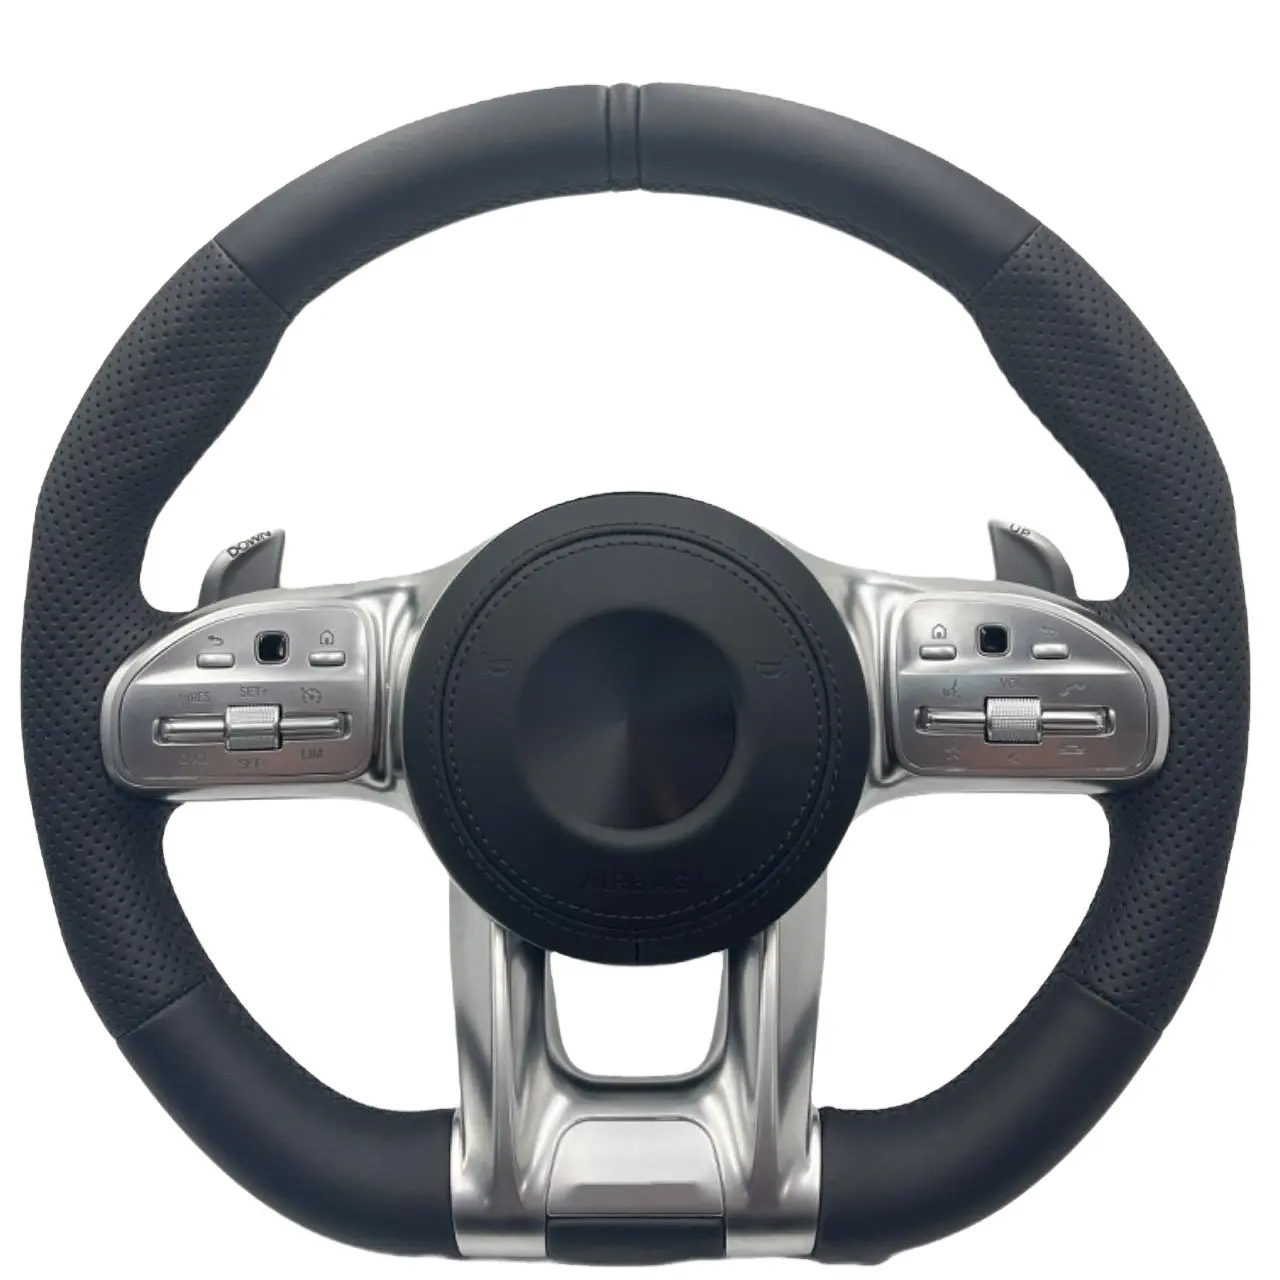 Suitable for Mercedes-Benz 809 sports steering wheel assembly, old to new non-destructive replacement, direct installation